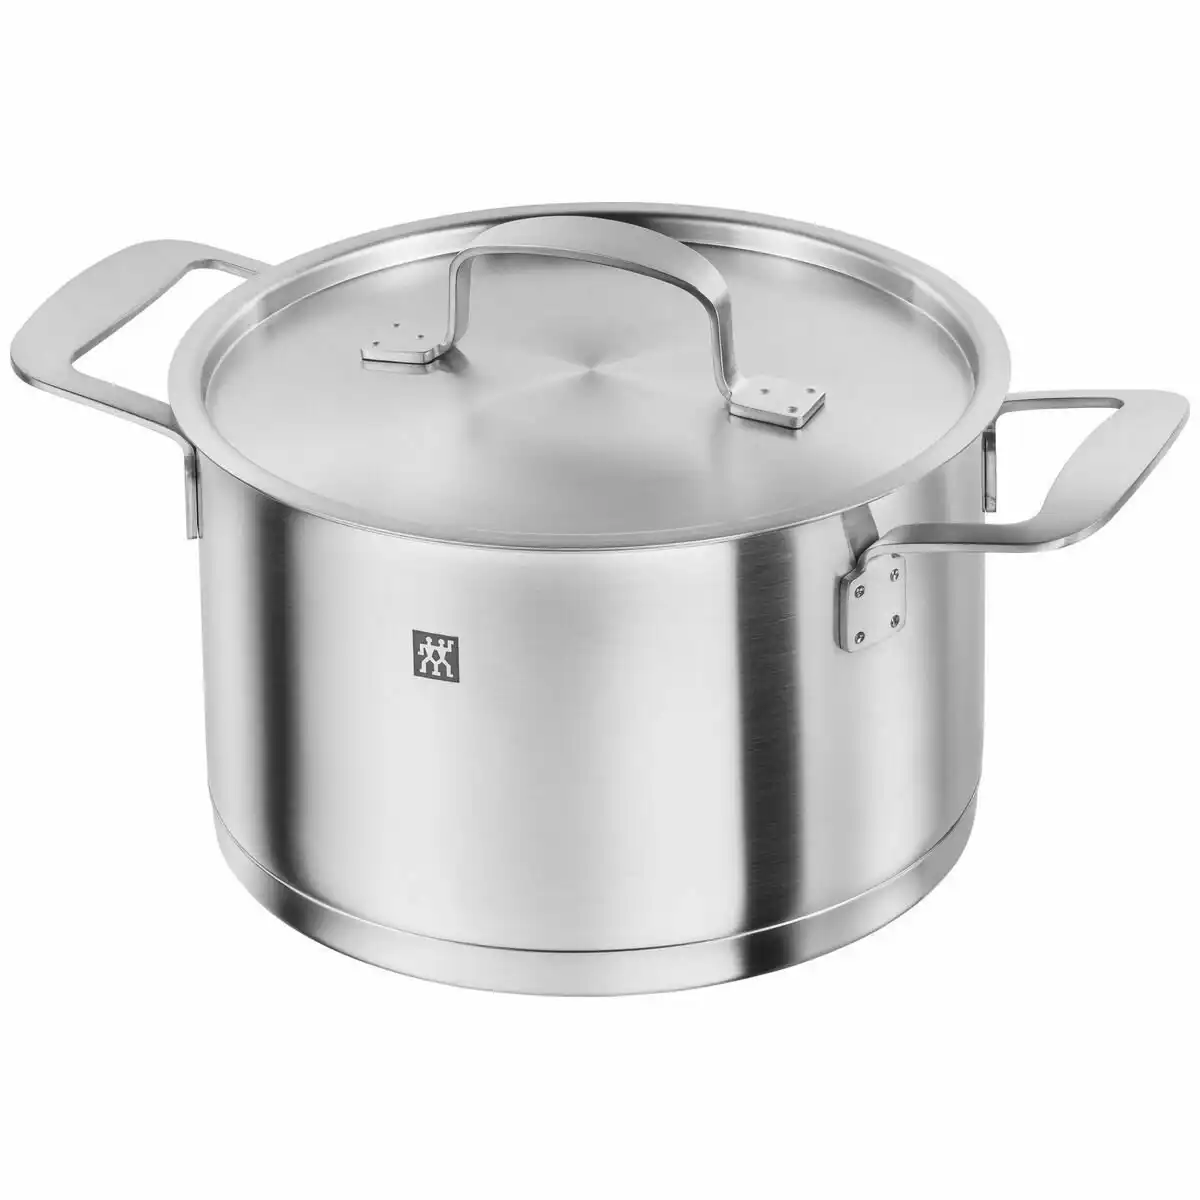 Zwilling 20cm Base Stock pot with Lid